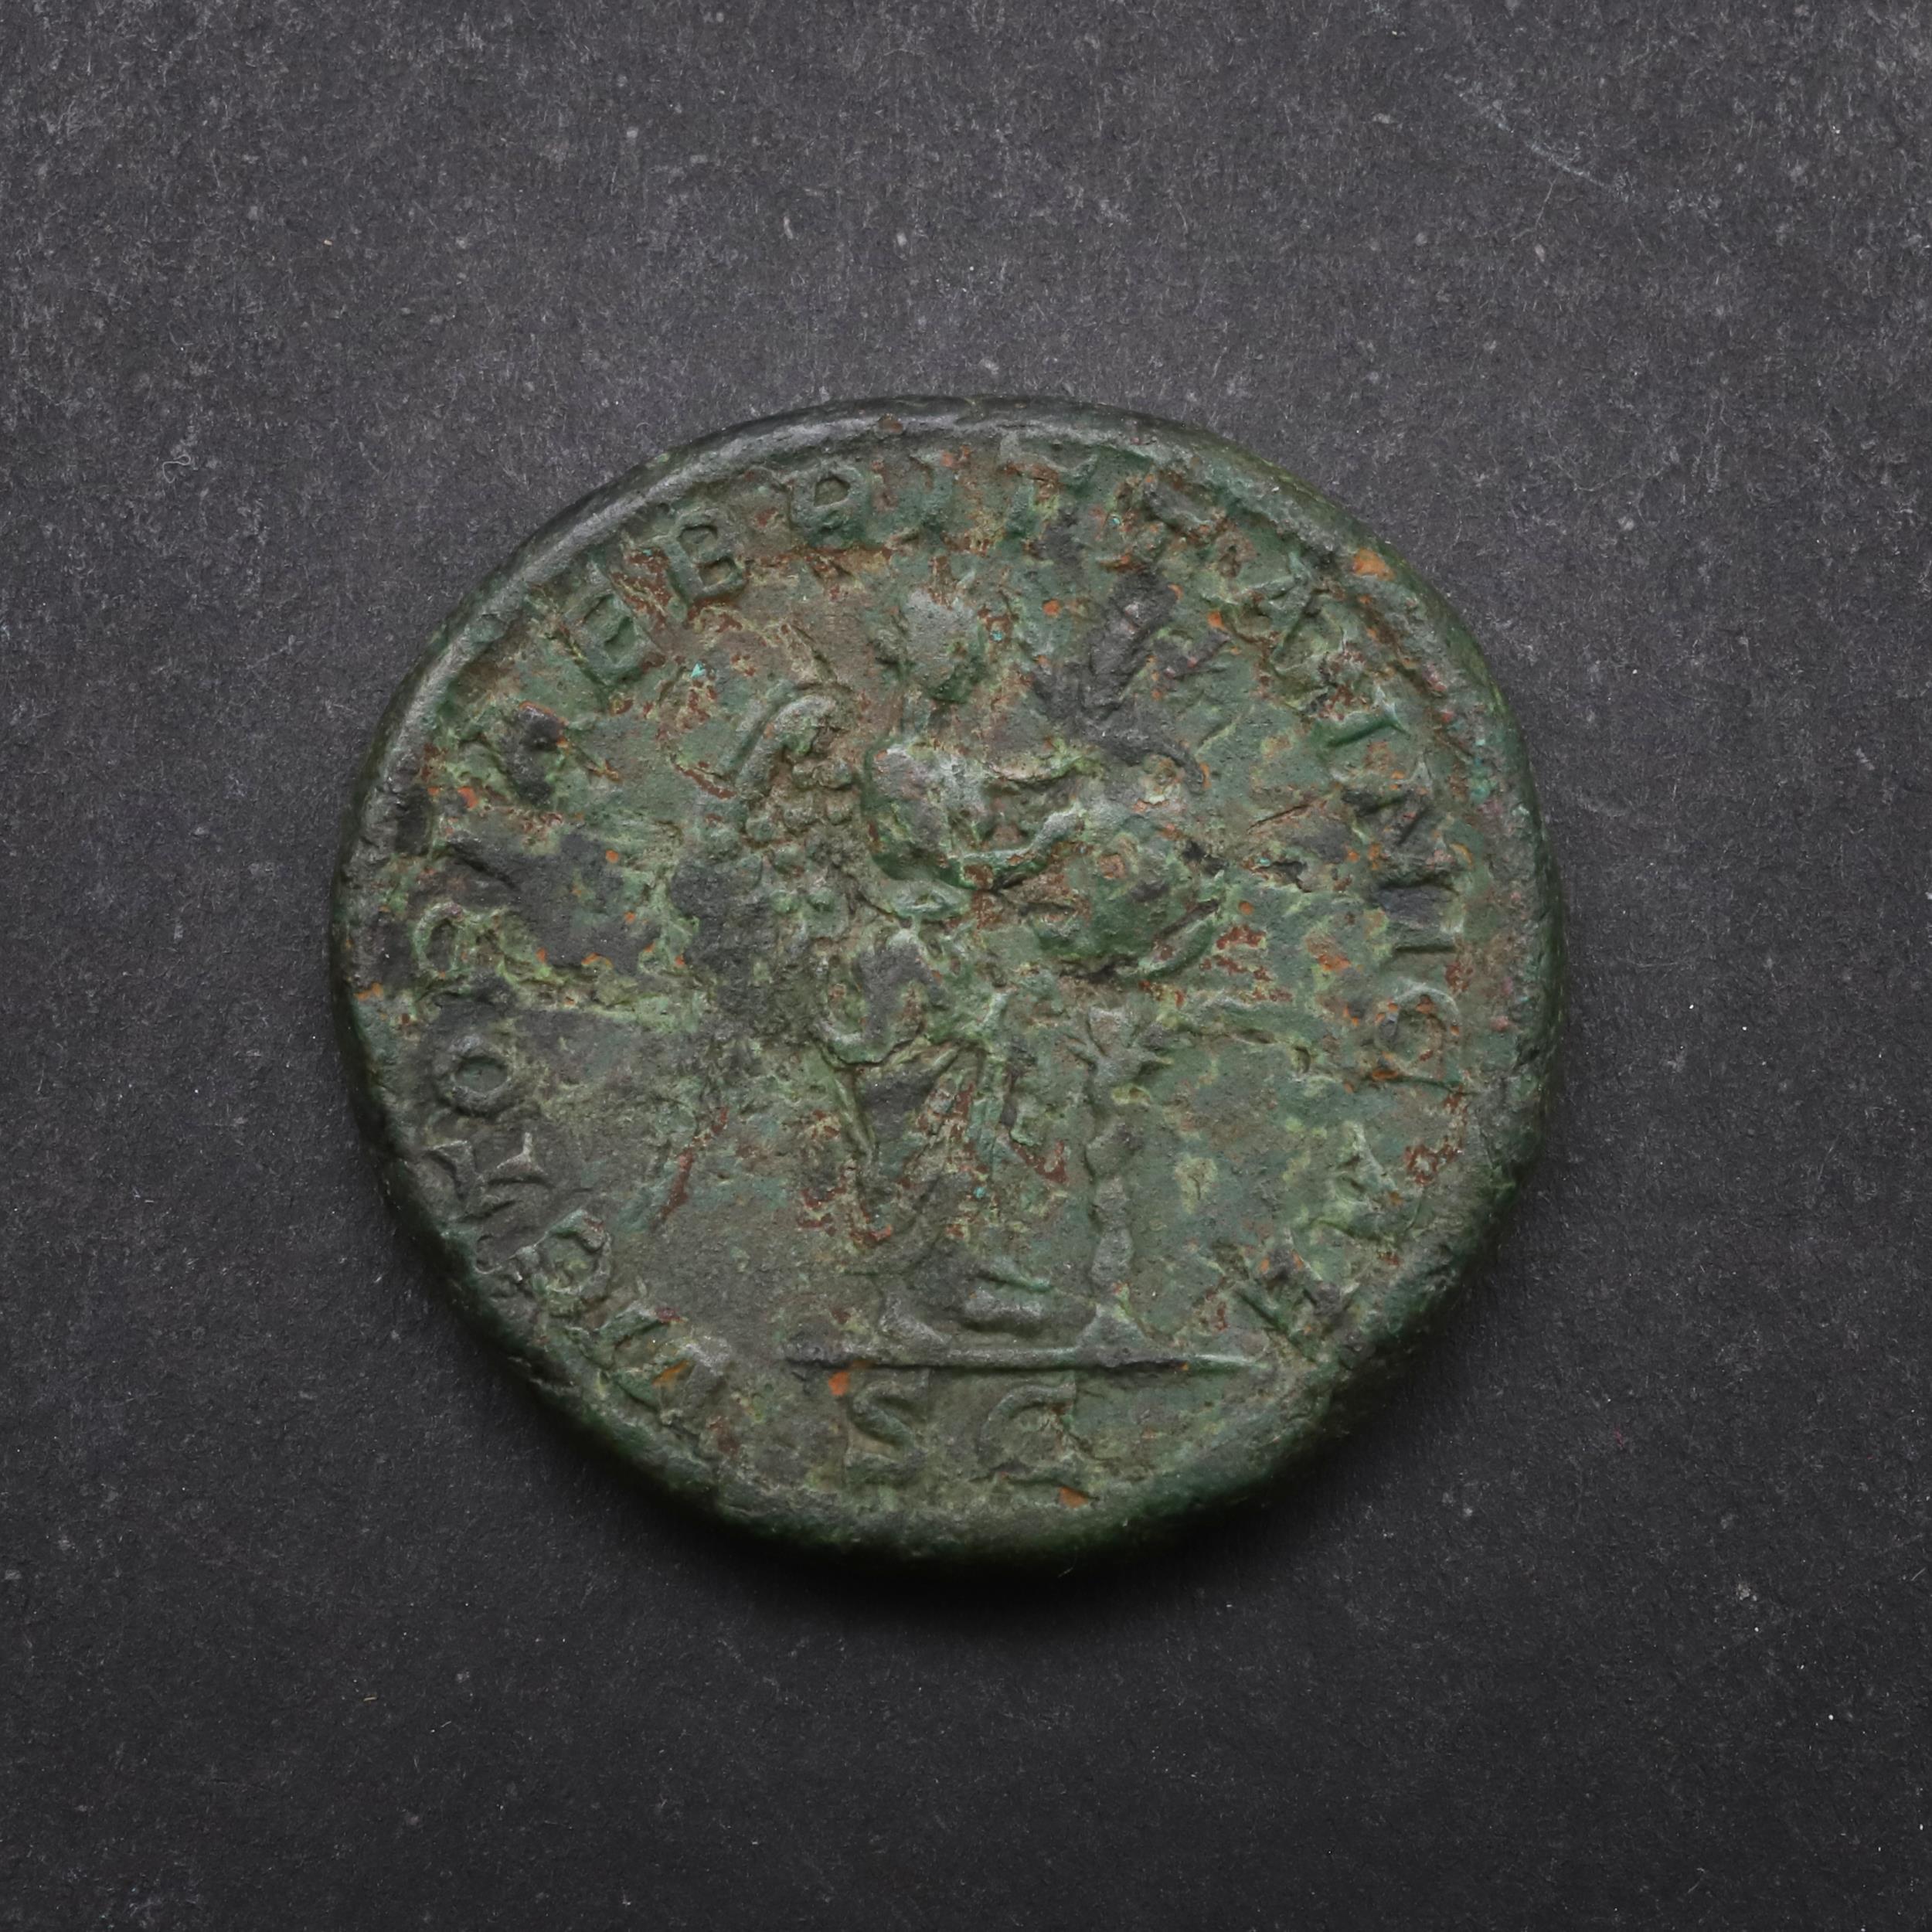 ROMAN IMPERIAL COINAGE: A COPPER AS OF ANTONINIUS PIUS WITH BRITANNIA REVERSE, 138-161 A.D. - Image 2 of 3